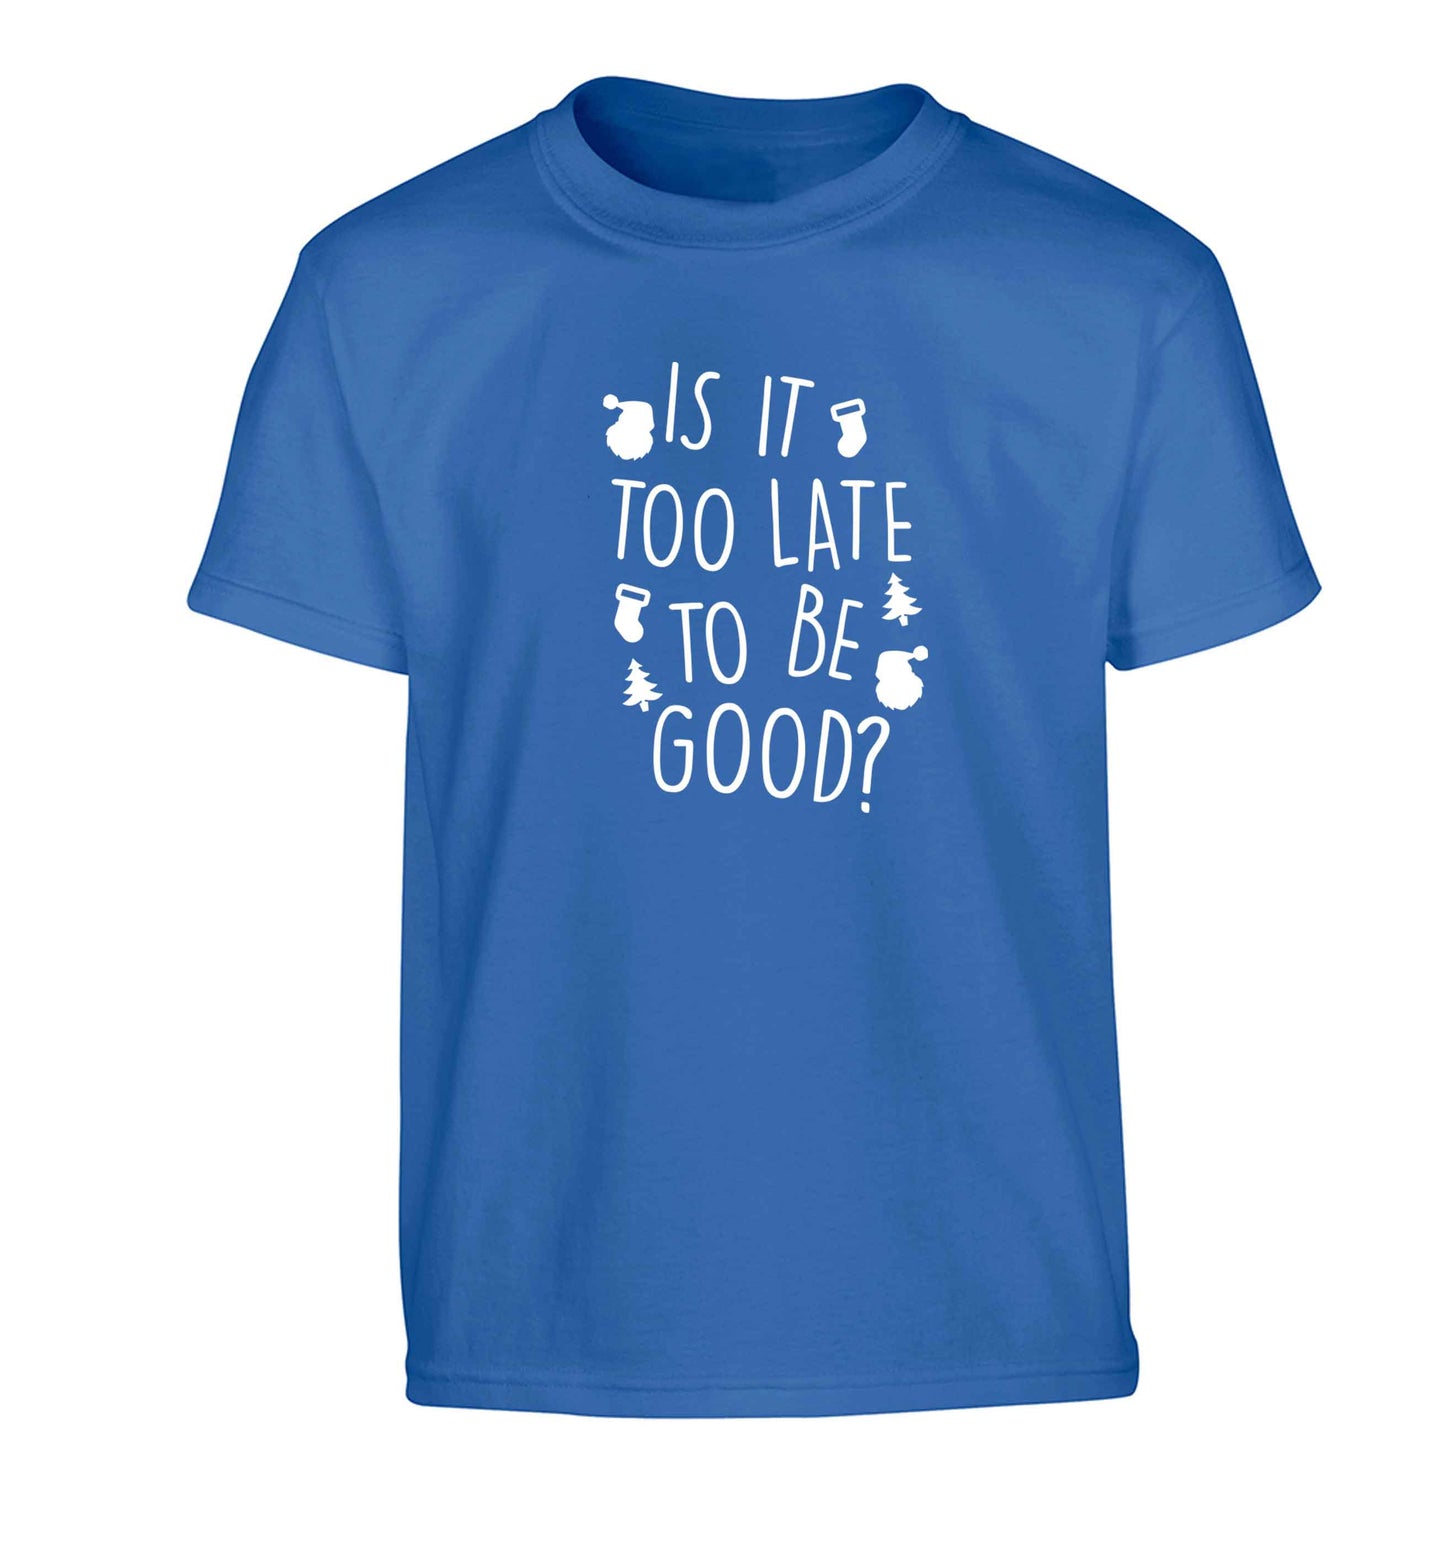 Too Late to be Good Children's blue Tshirt 12-13 Years